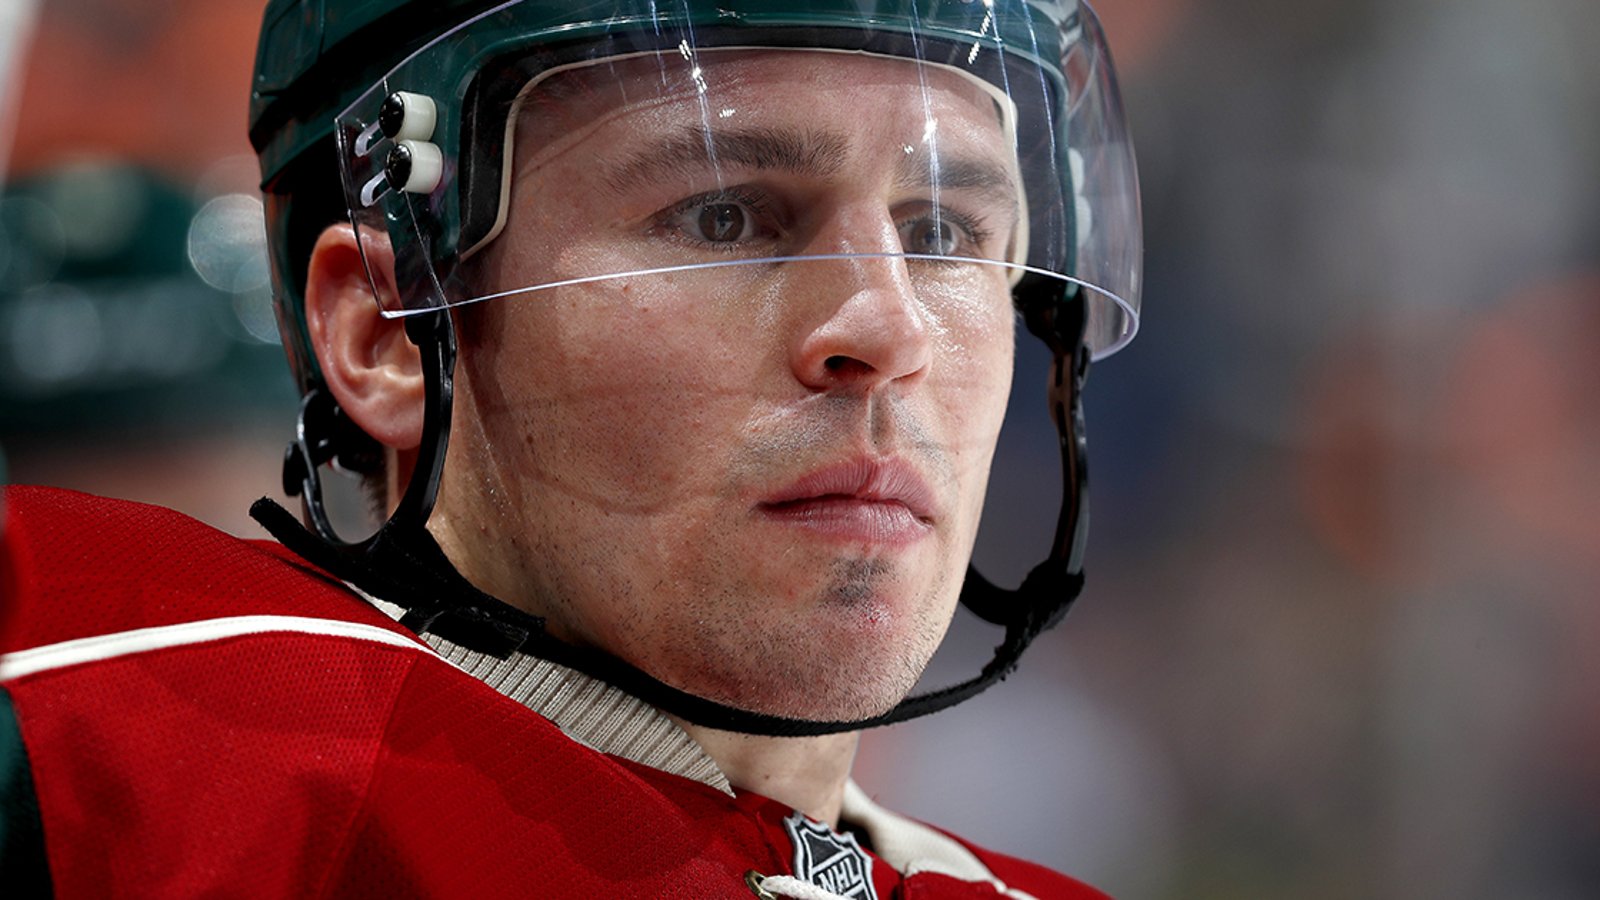 Breaking: Parise to undergo back surgery, out long-term